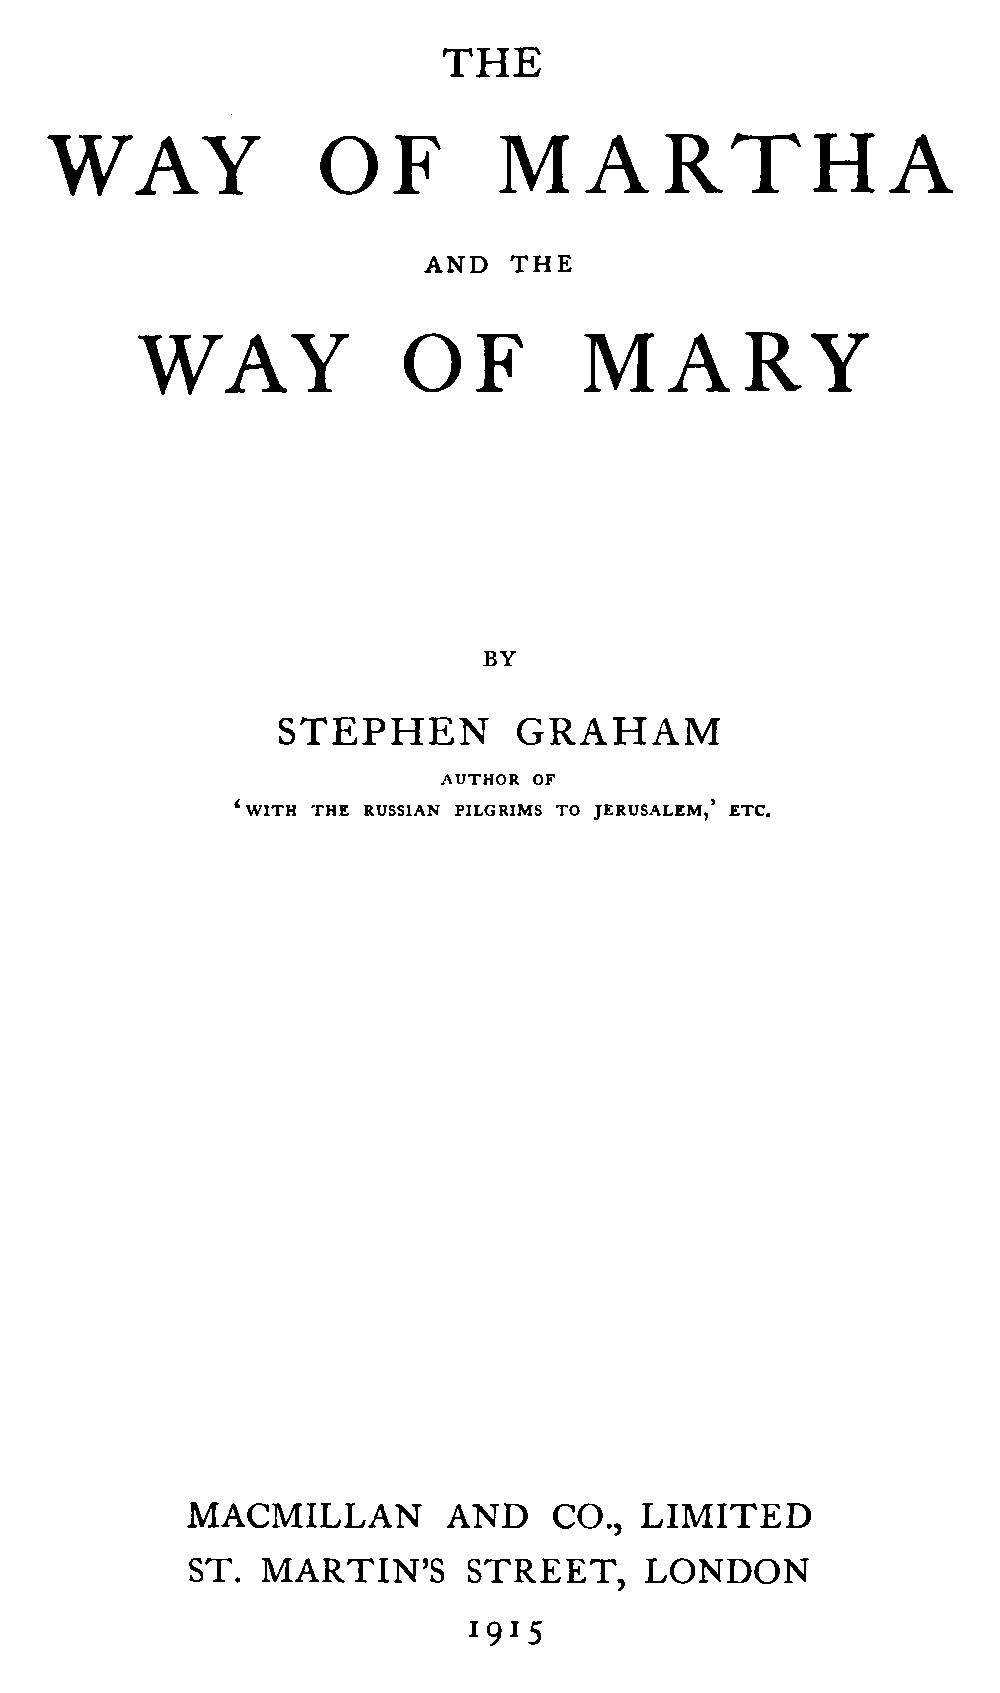 The Project Gutenberg eBook of The Way of Martha and the Way of Mary, by Stephen Graham picture